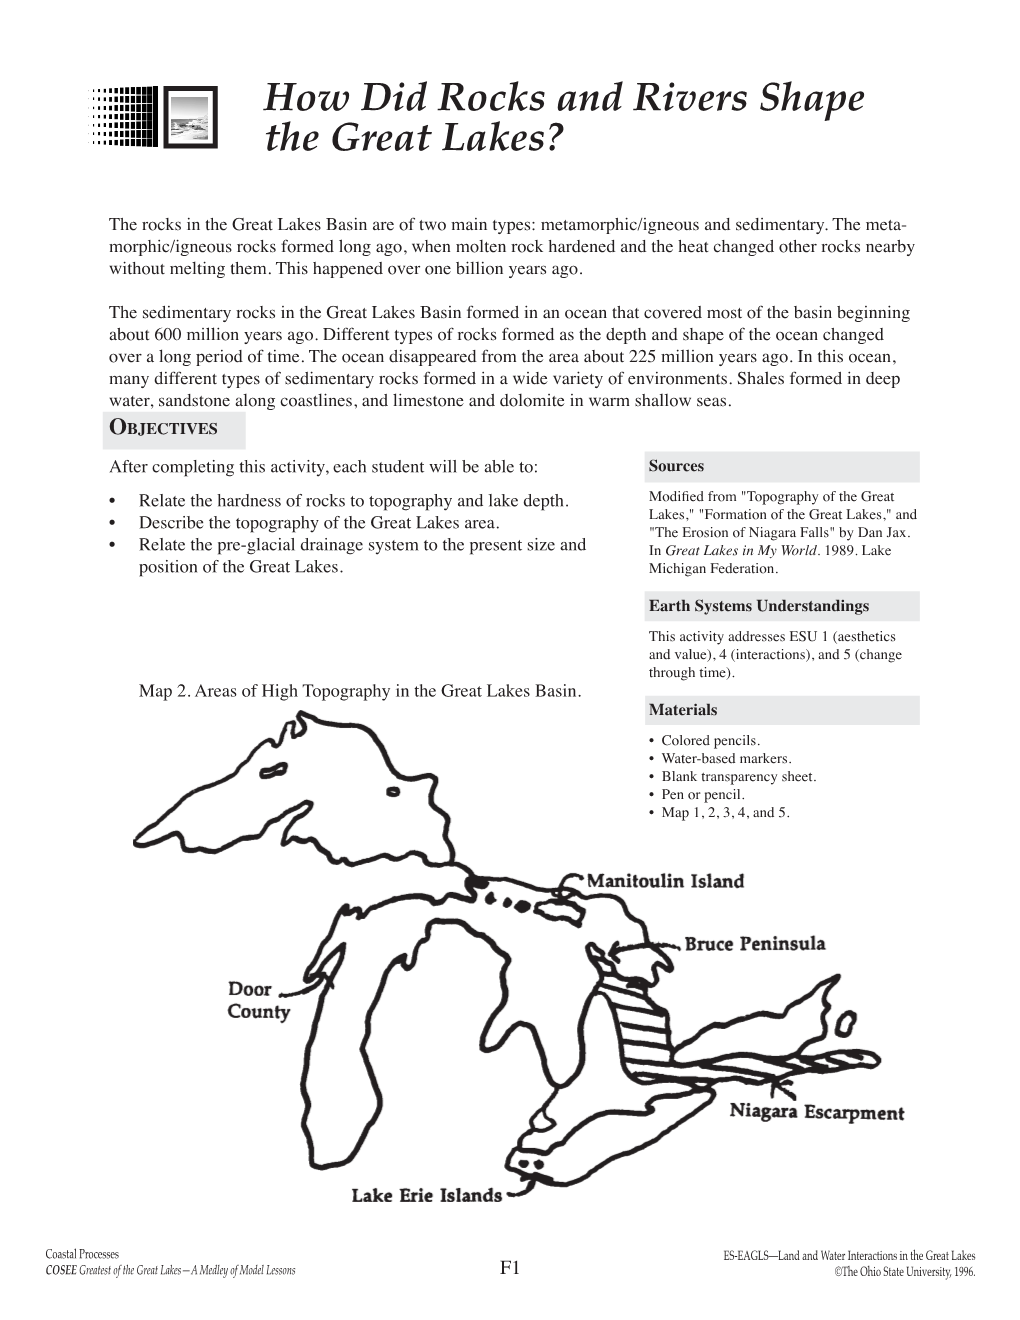 How Did Rocks and Rivers Shape the Great Lakes?